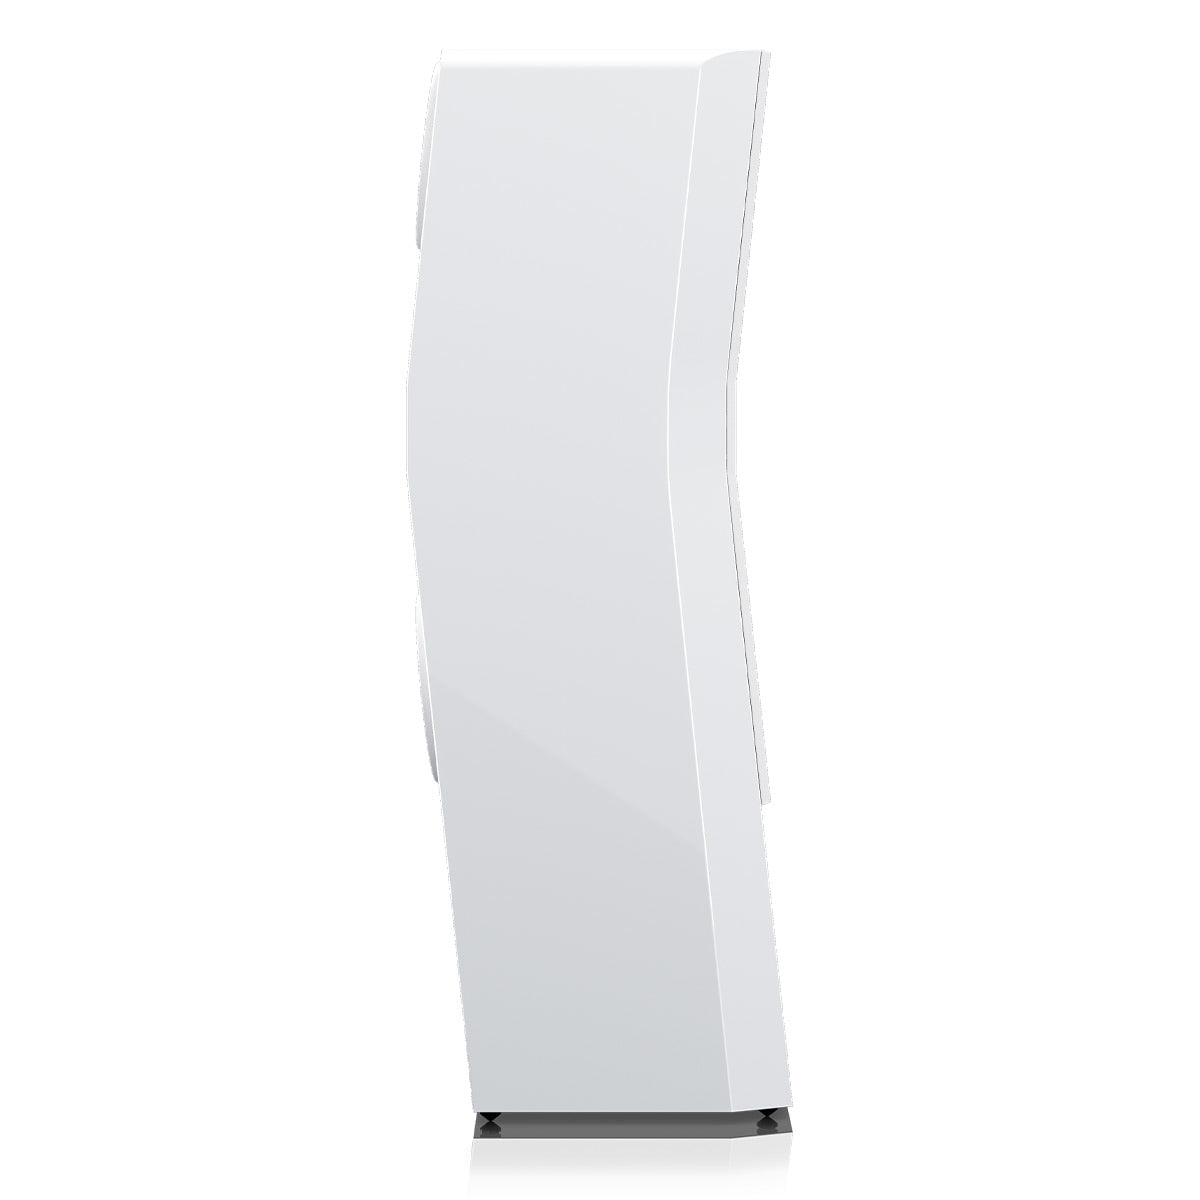 SVS Ultra Evolution Pinnacle Tower Speaker with Quad 8" Woofers - Each (Piano Gloss White)